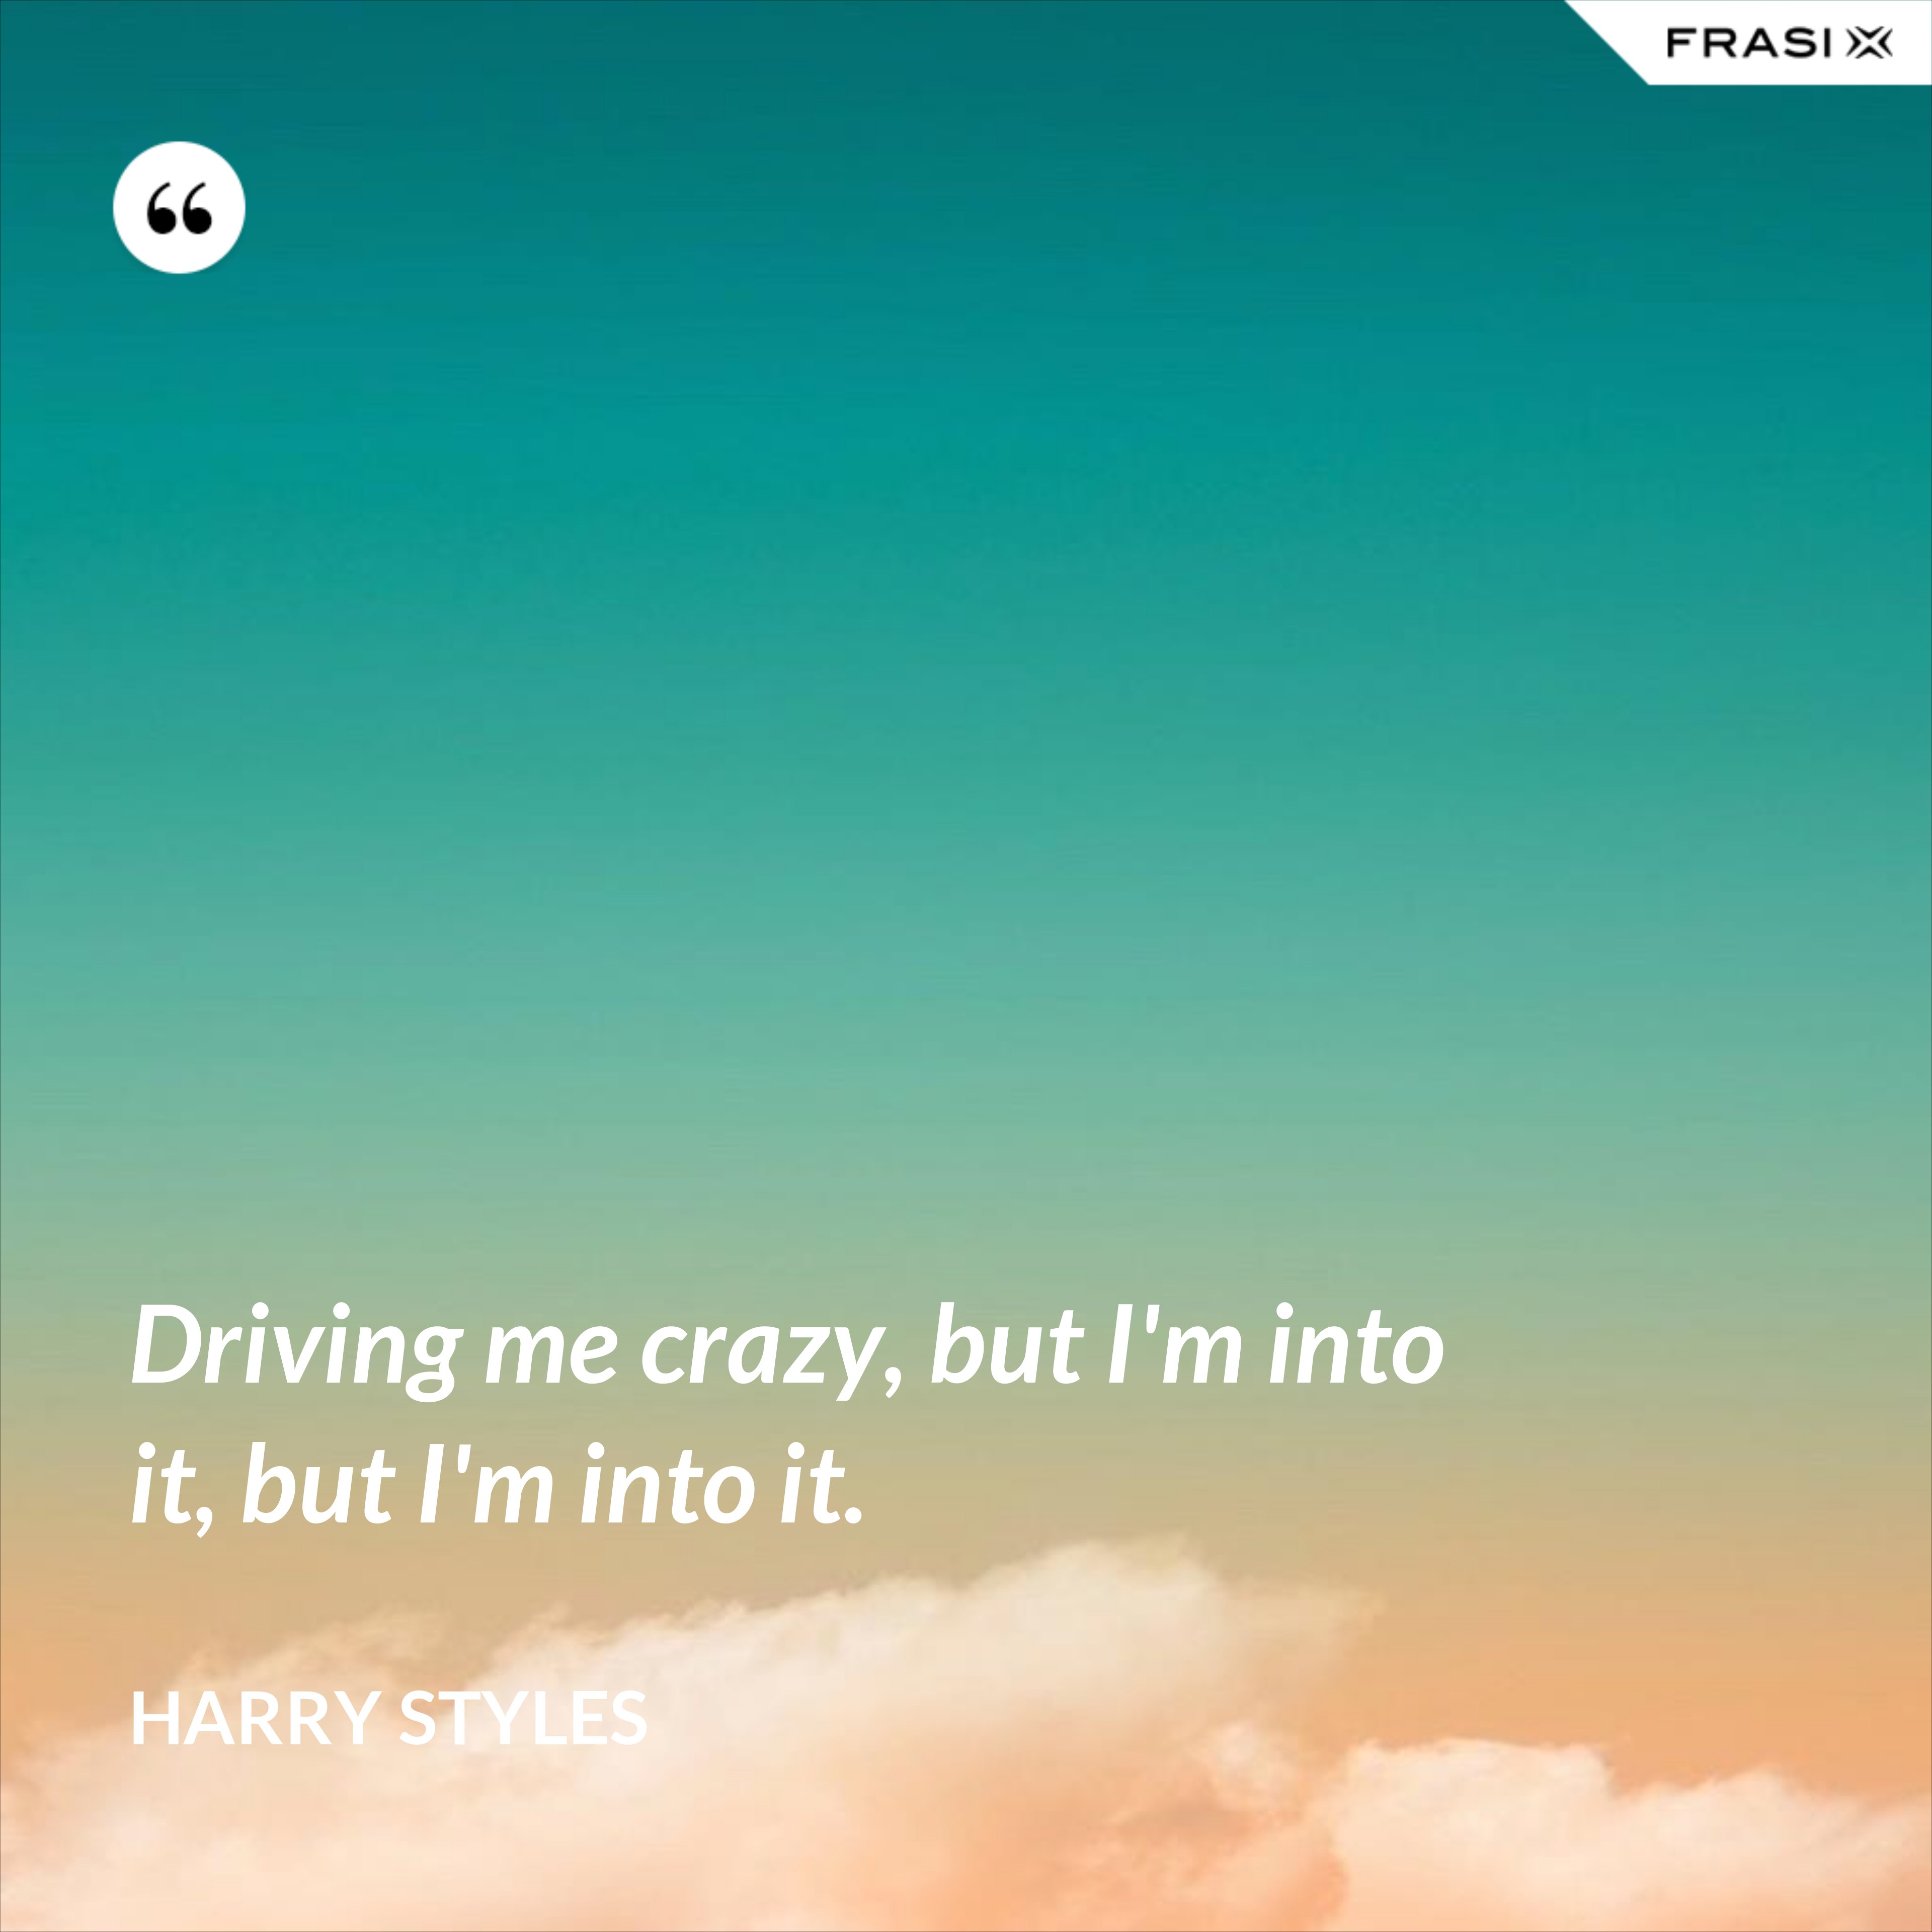 Driving me crazy, but I'm into it, but I'm into it. - Harry Styles